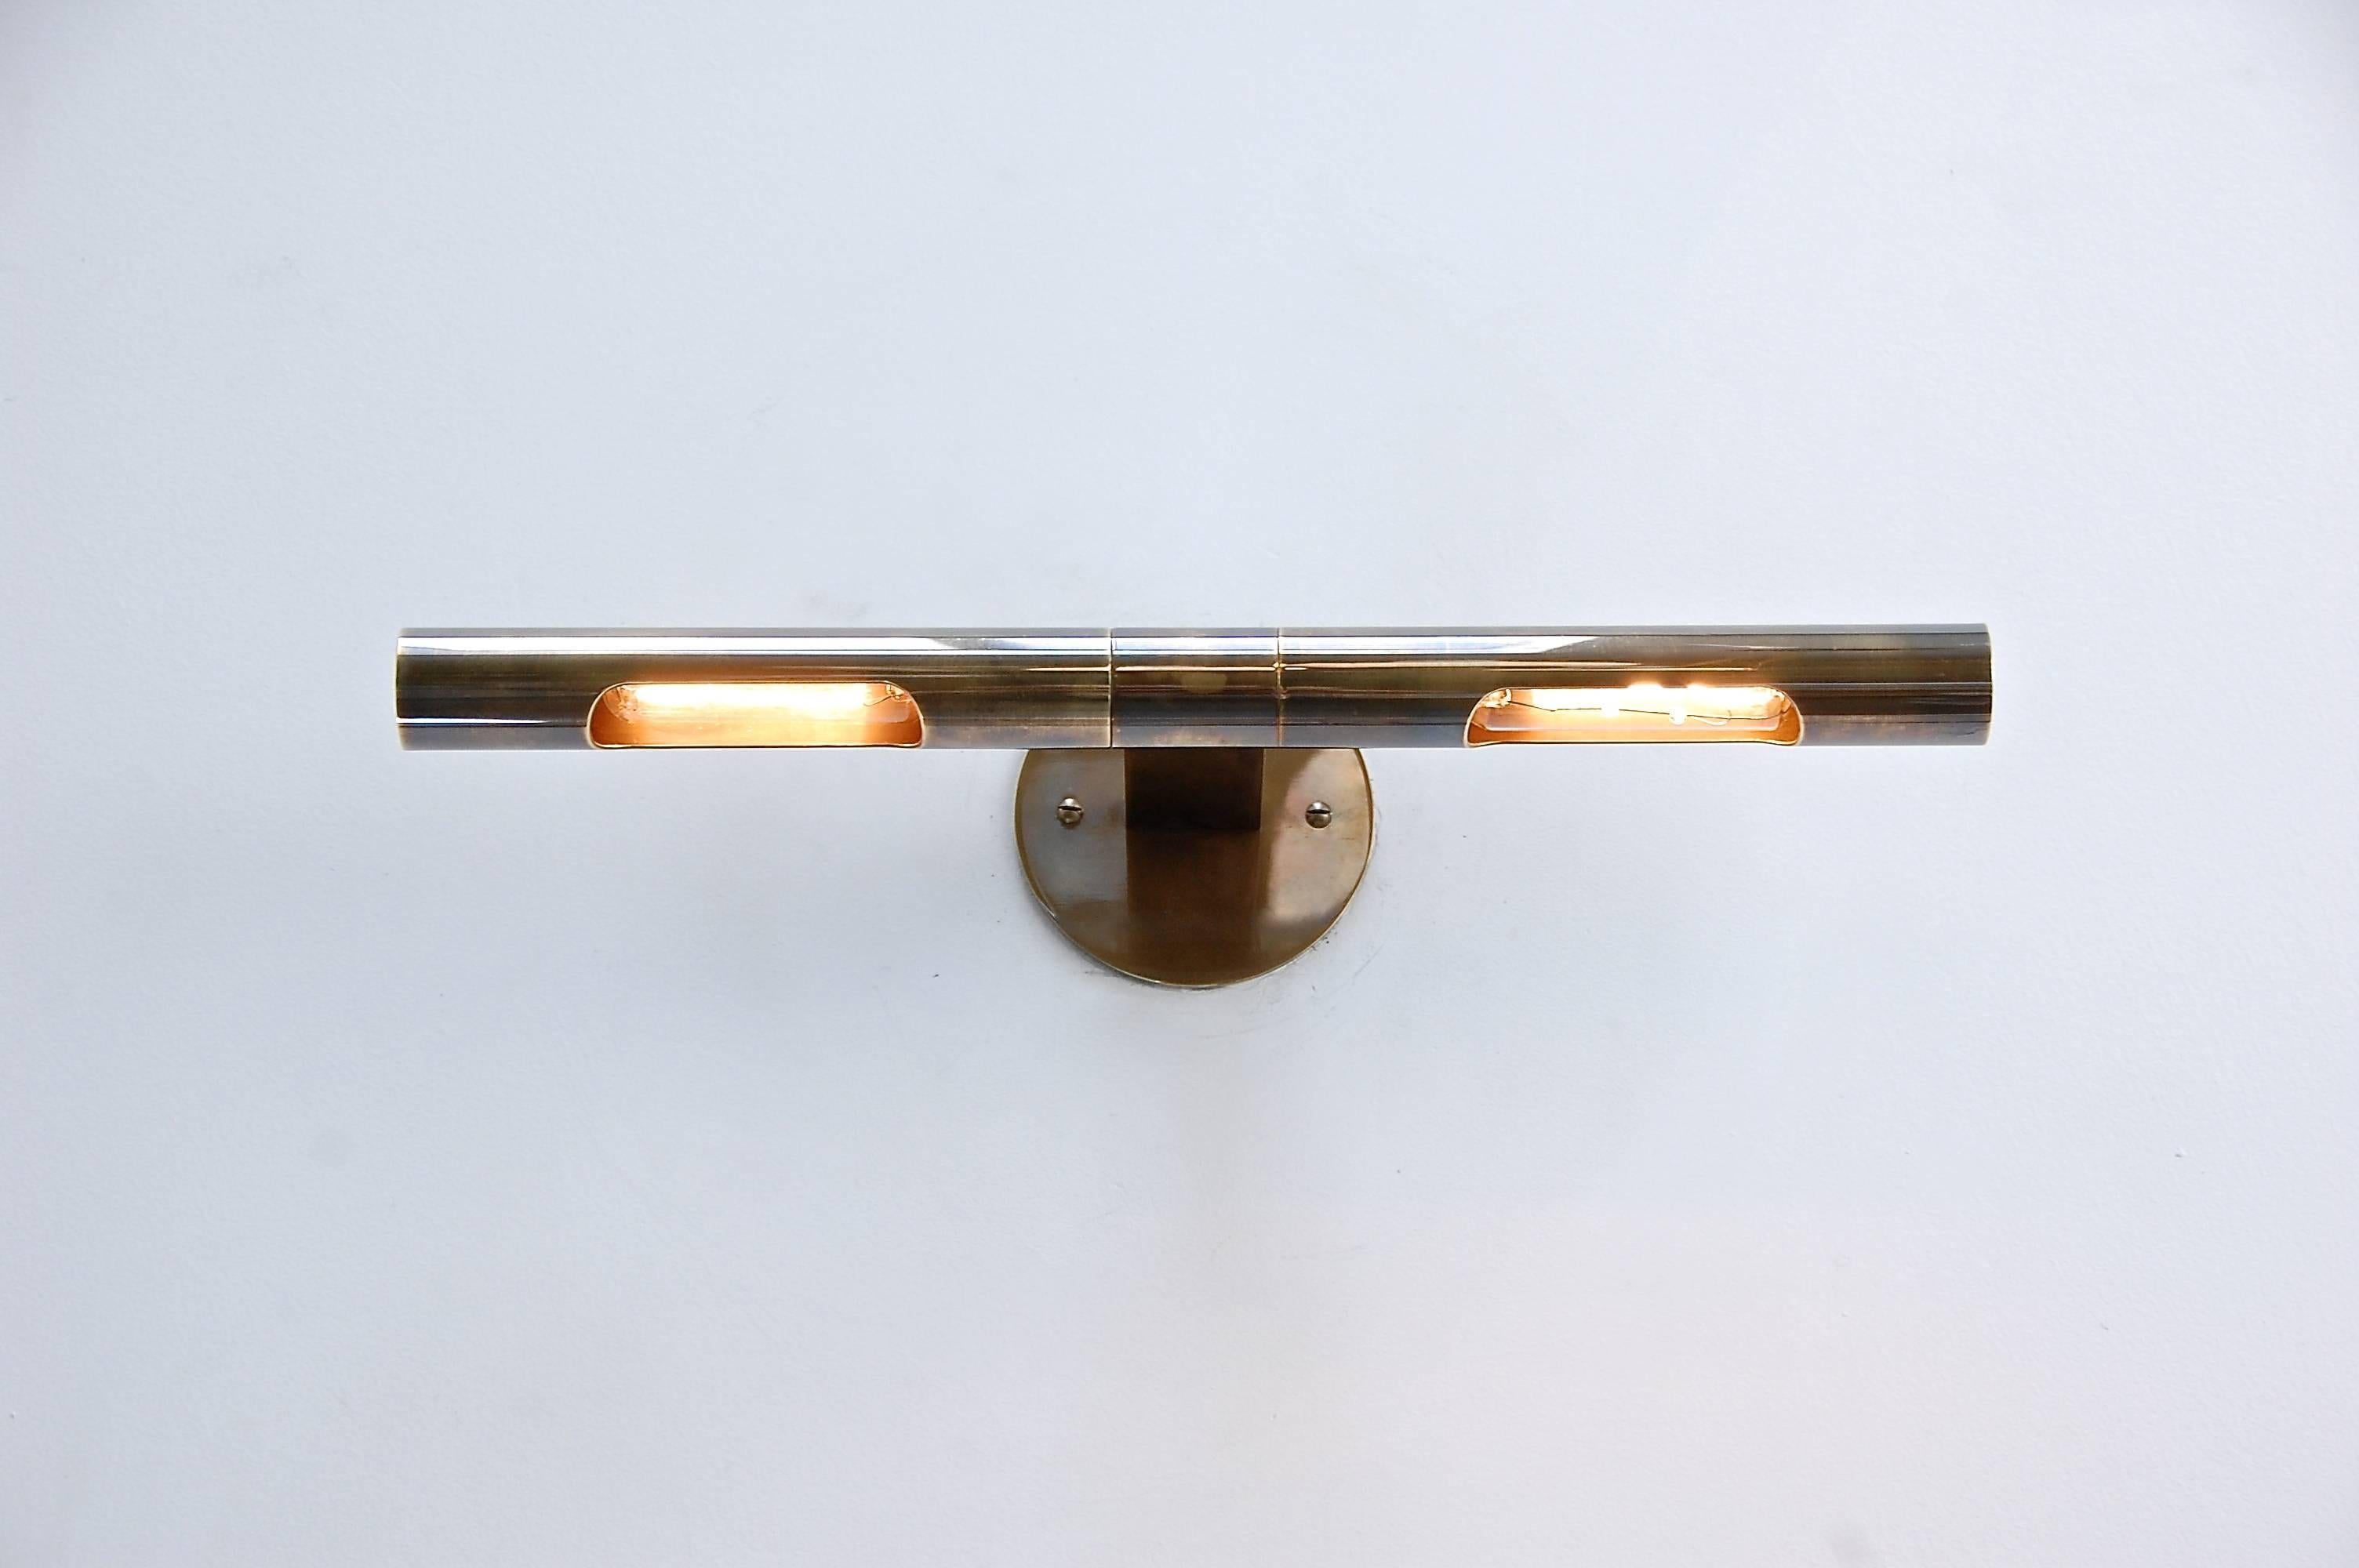 LUart Directional Sconce PB is a superbly crafted linear wall sconce designed by Lumfardo Luminaires to feature artwork and/or objets d’art. Each shade is independent and can be directed individually. Patina un-lacquered brass, different finishes